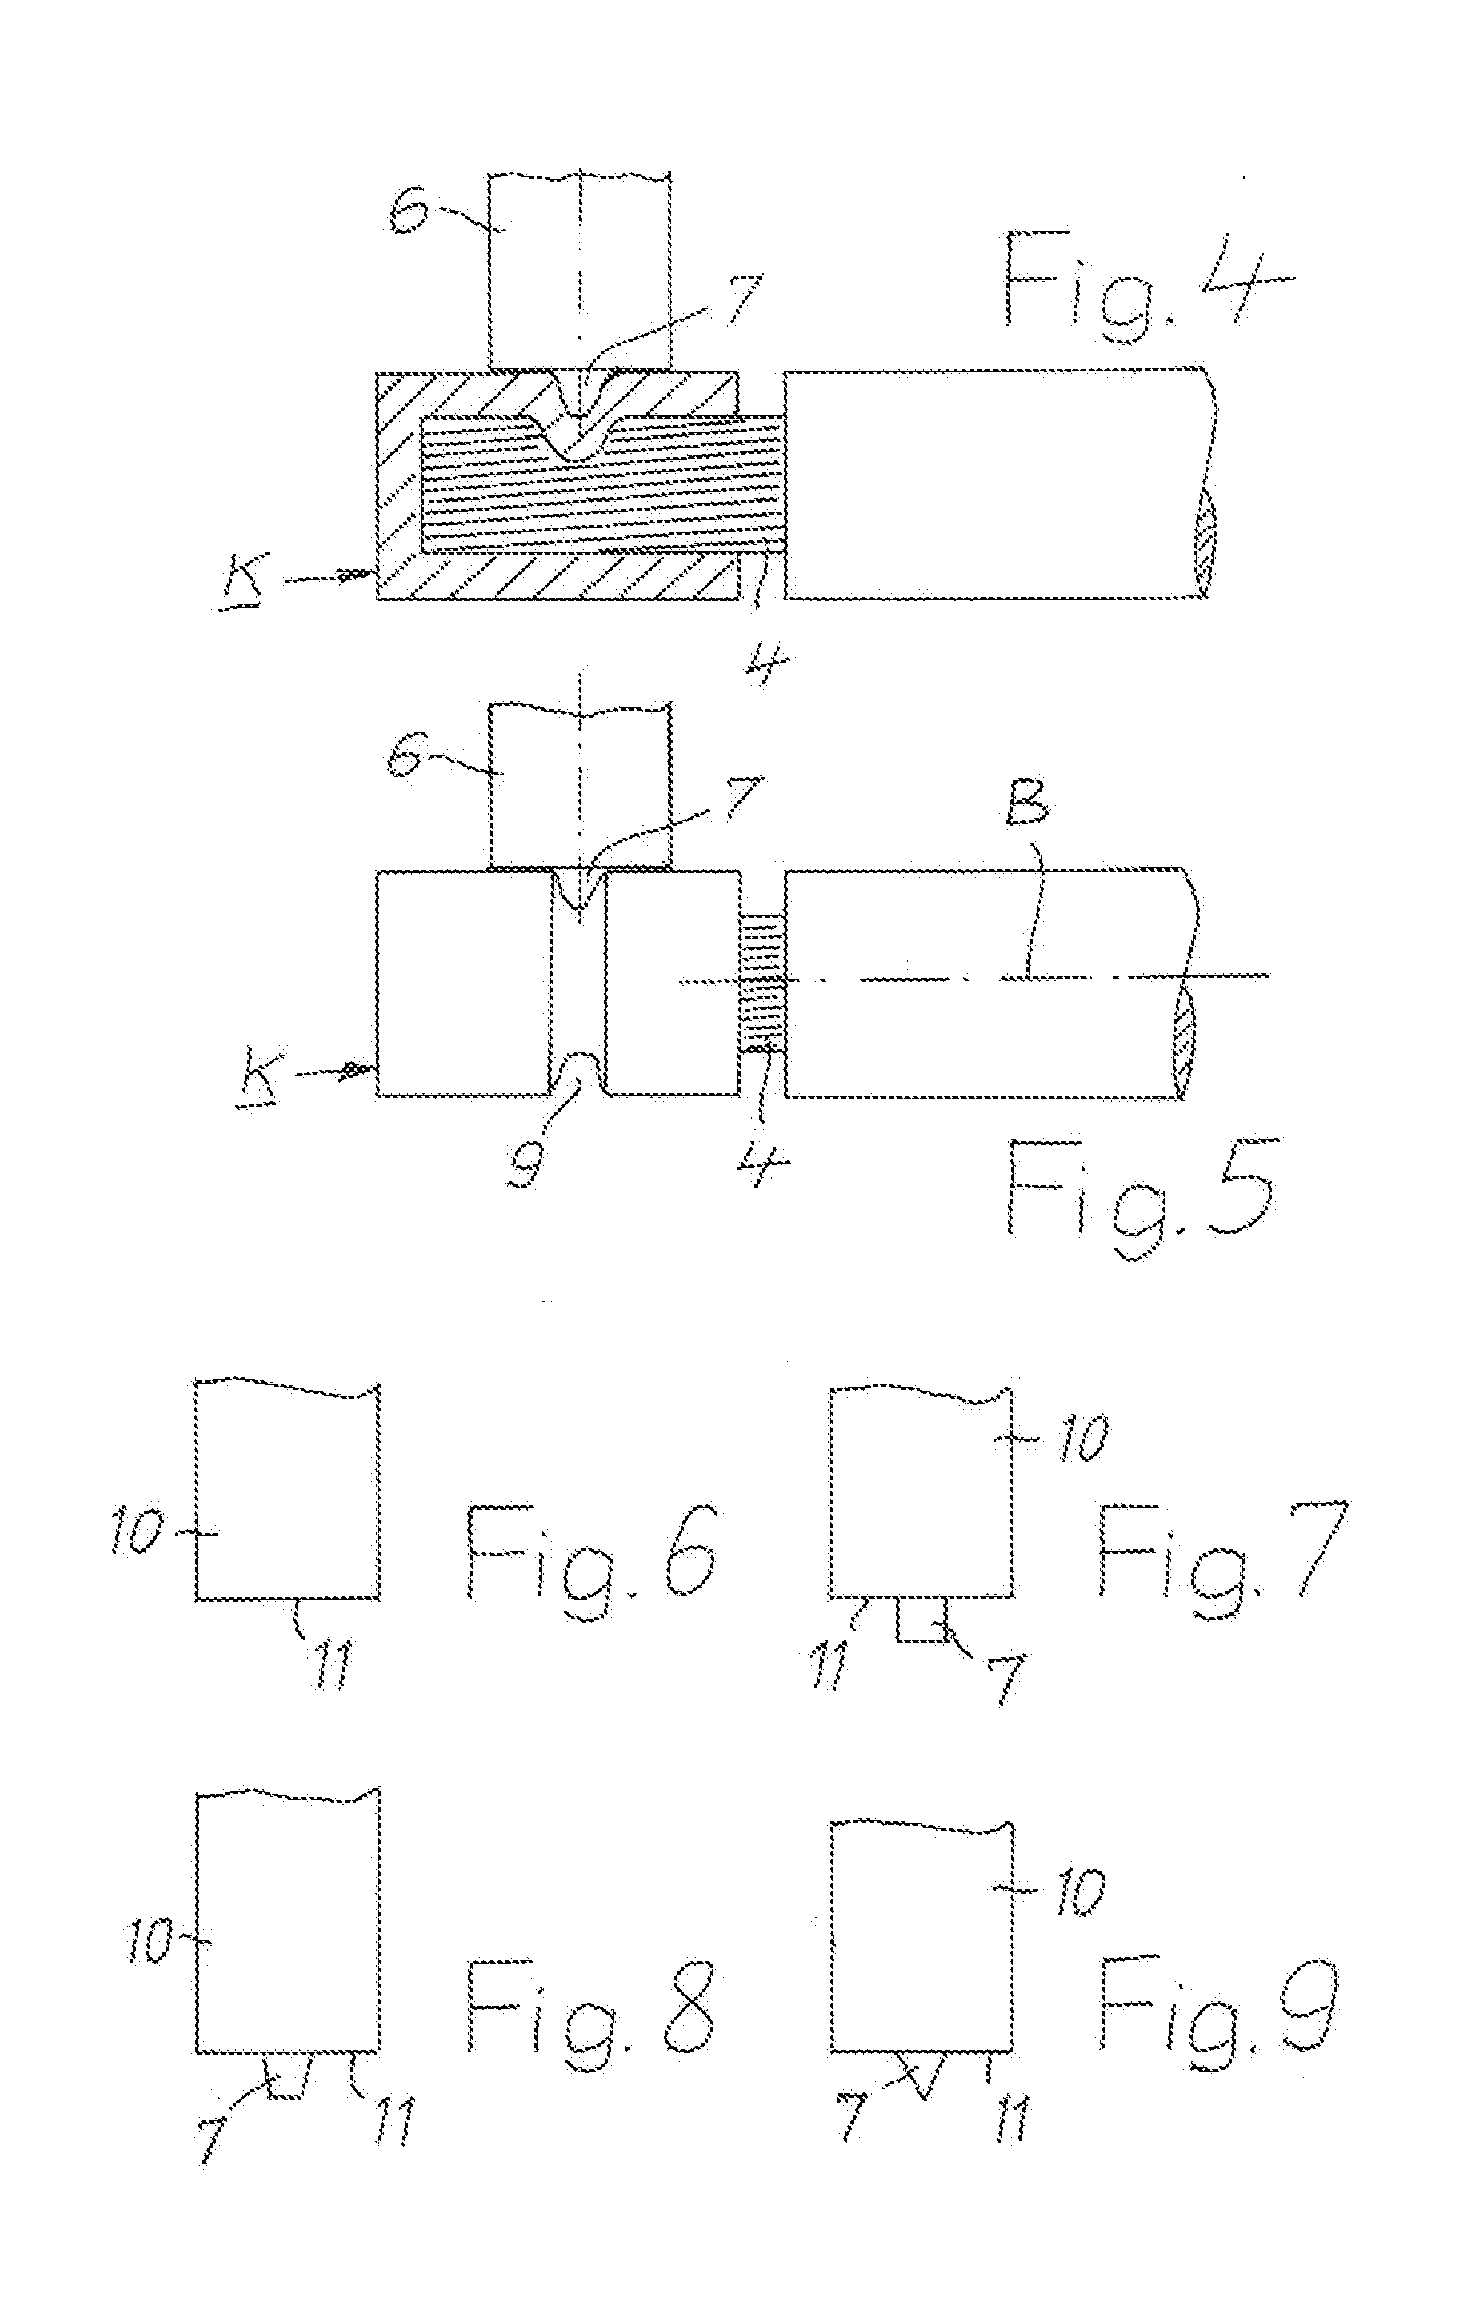 Method for electrically conductively connecting a contact piece to an electrical conductor, and corresponding arrangement